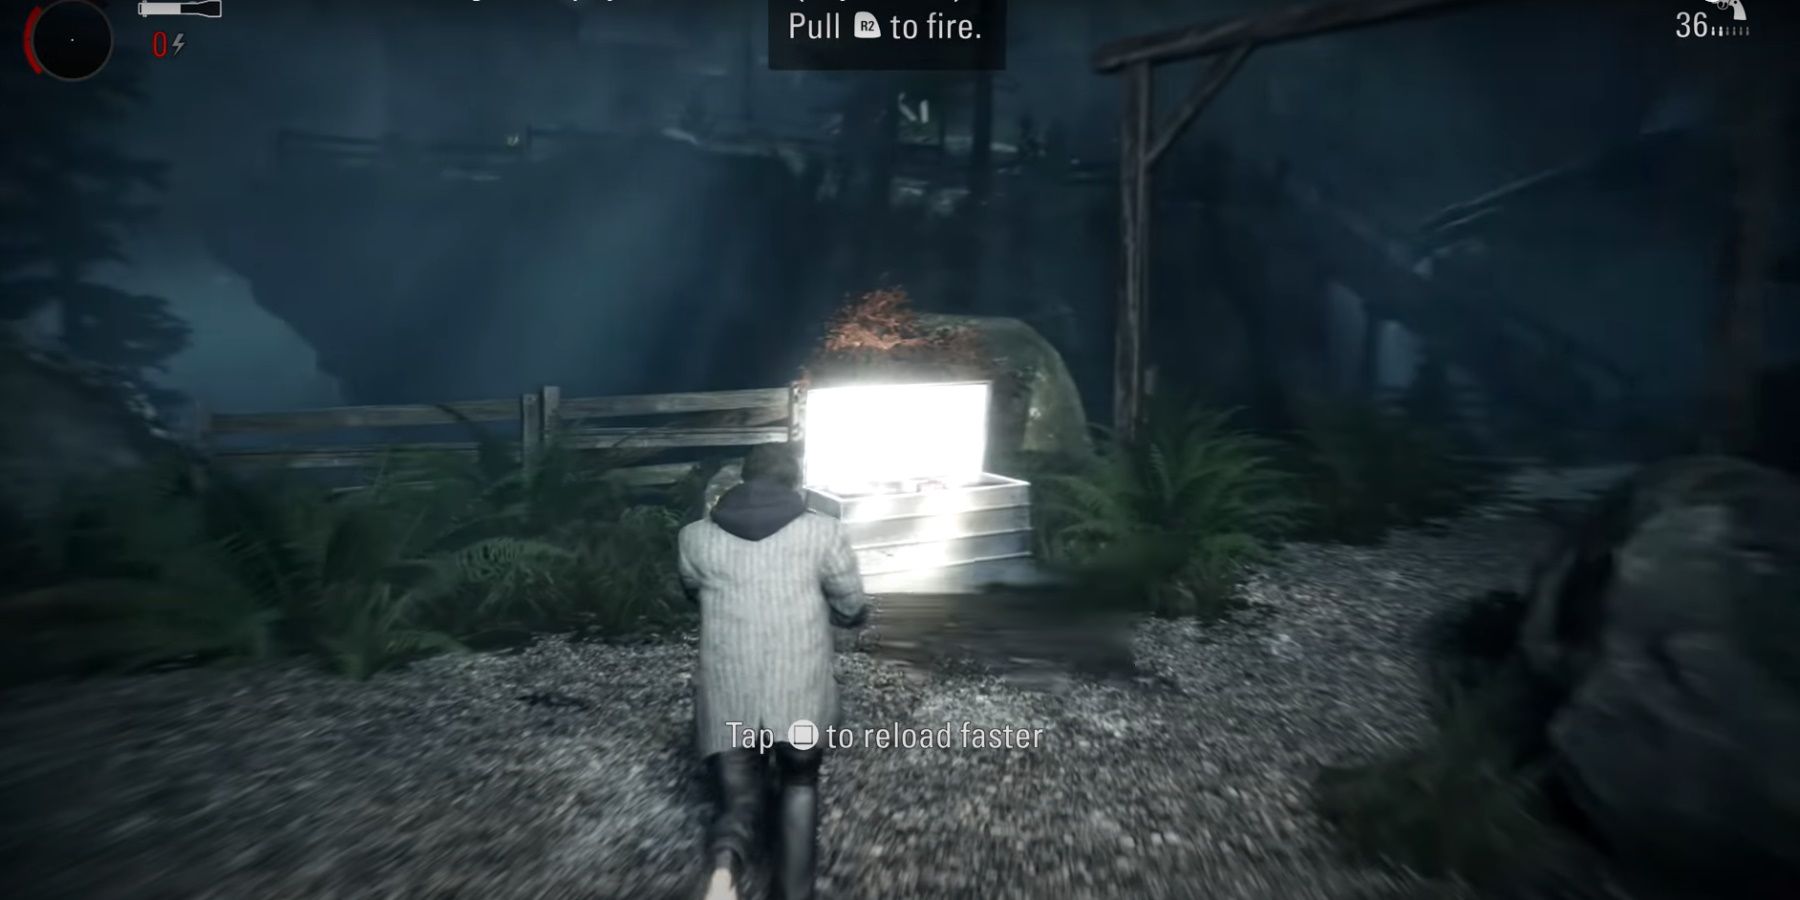 alan wake reloading by an ammo box in the introduction segment